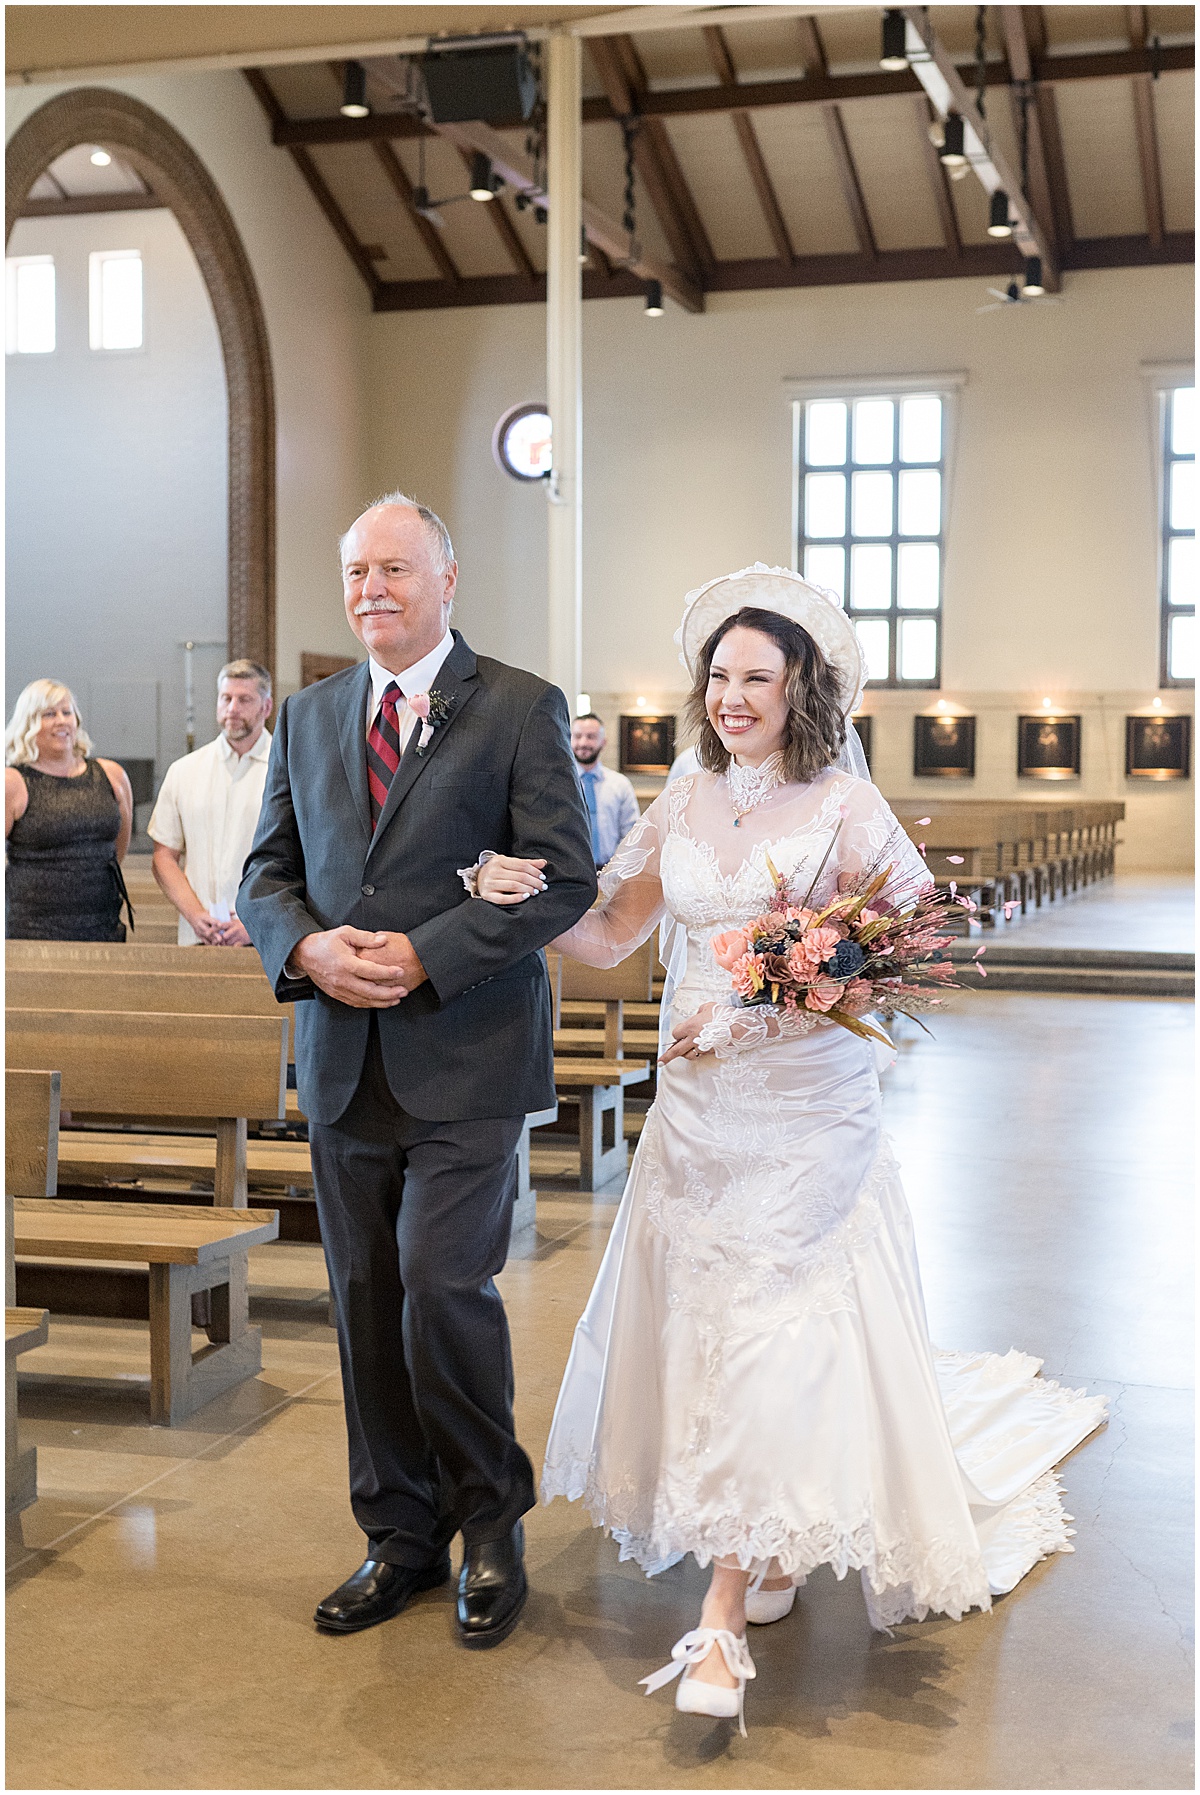 Bride walk down aisle at wedding at St. Thomas Aquina Church in West Lafayette, Indiana